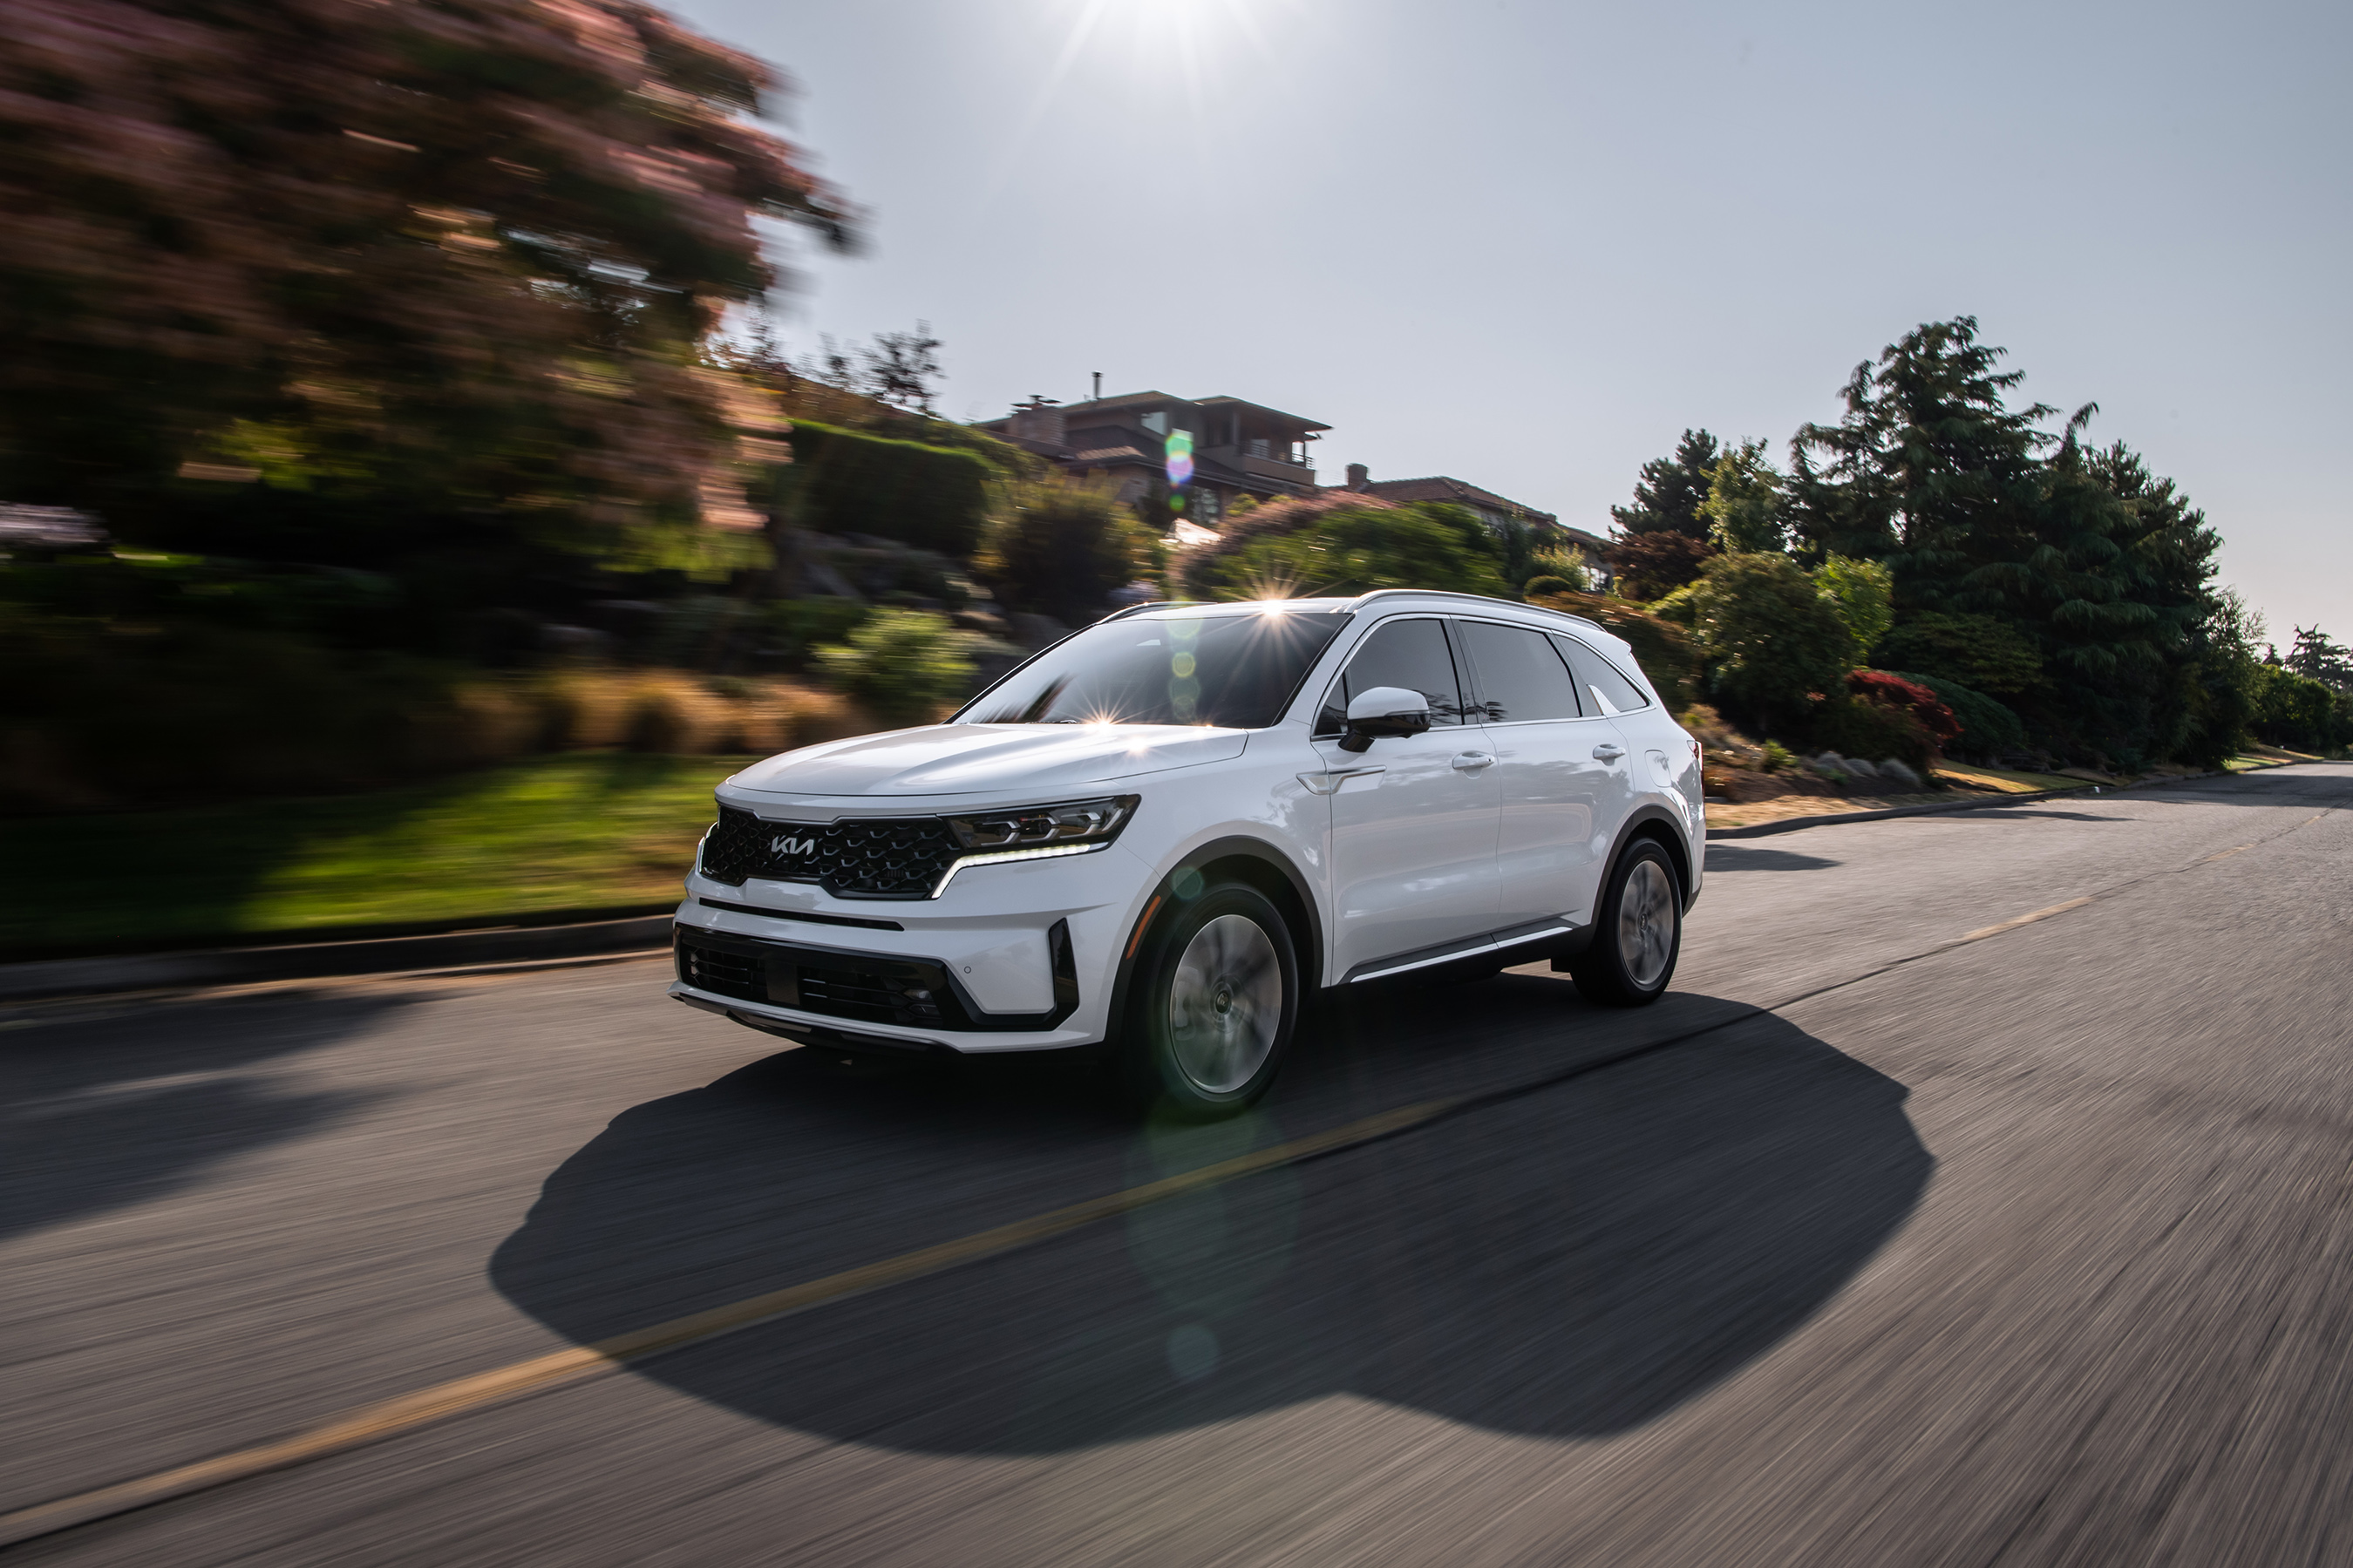 The Sorento PHEV offers a full suite of standard Kia Drive Wise Advanced Driver-Assistance Systems (ADAS), including Highway Driving Assist and Rear Cross Traffic Collision Avoidance technology.